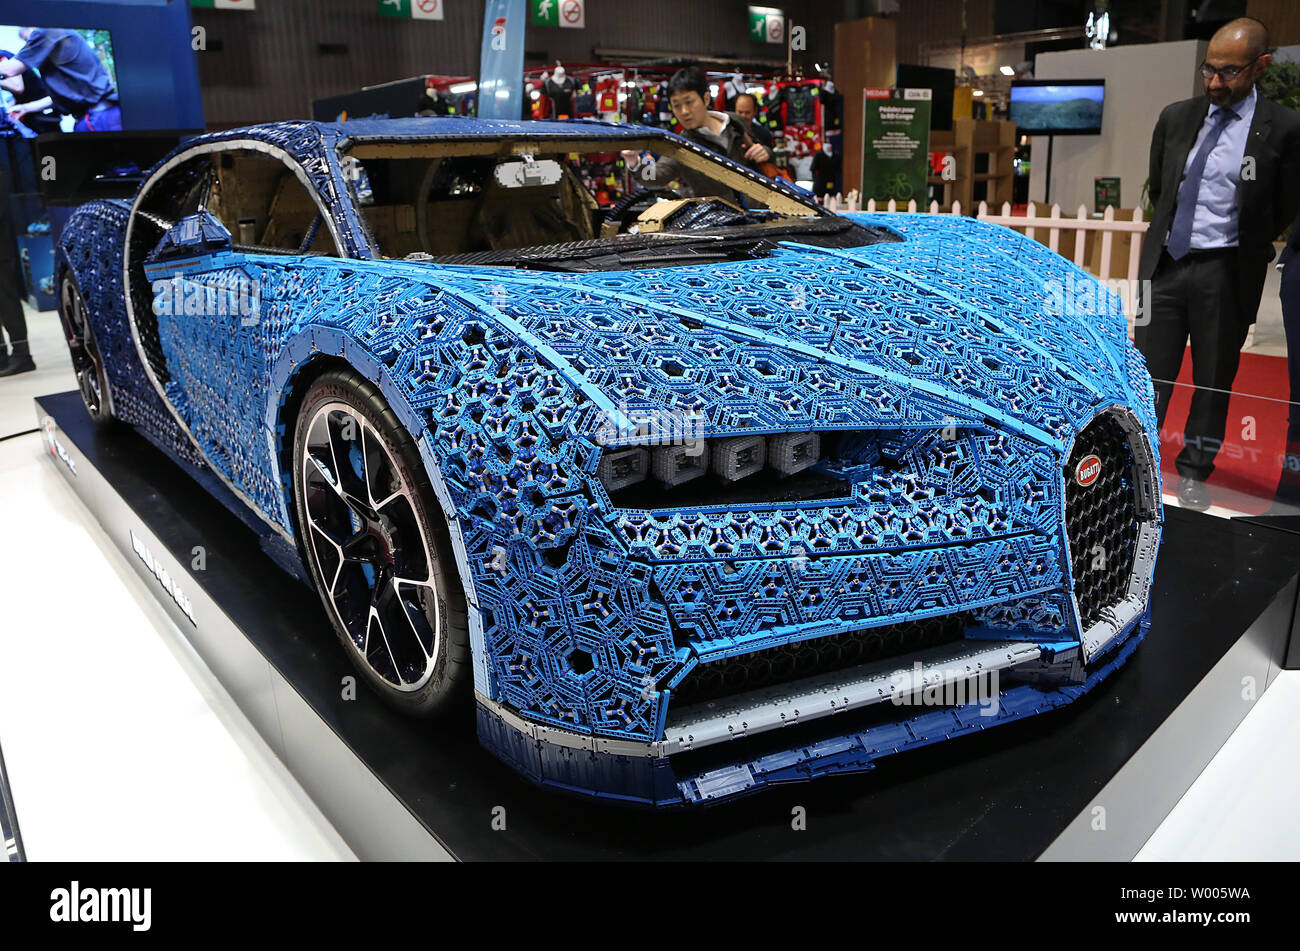 A life-size Bugatti Chiron made from Lego is seen on display during press  day at the biennial Paris Motor Show in Paris on October 2, 2018. The show,  the first motor show